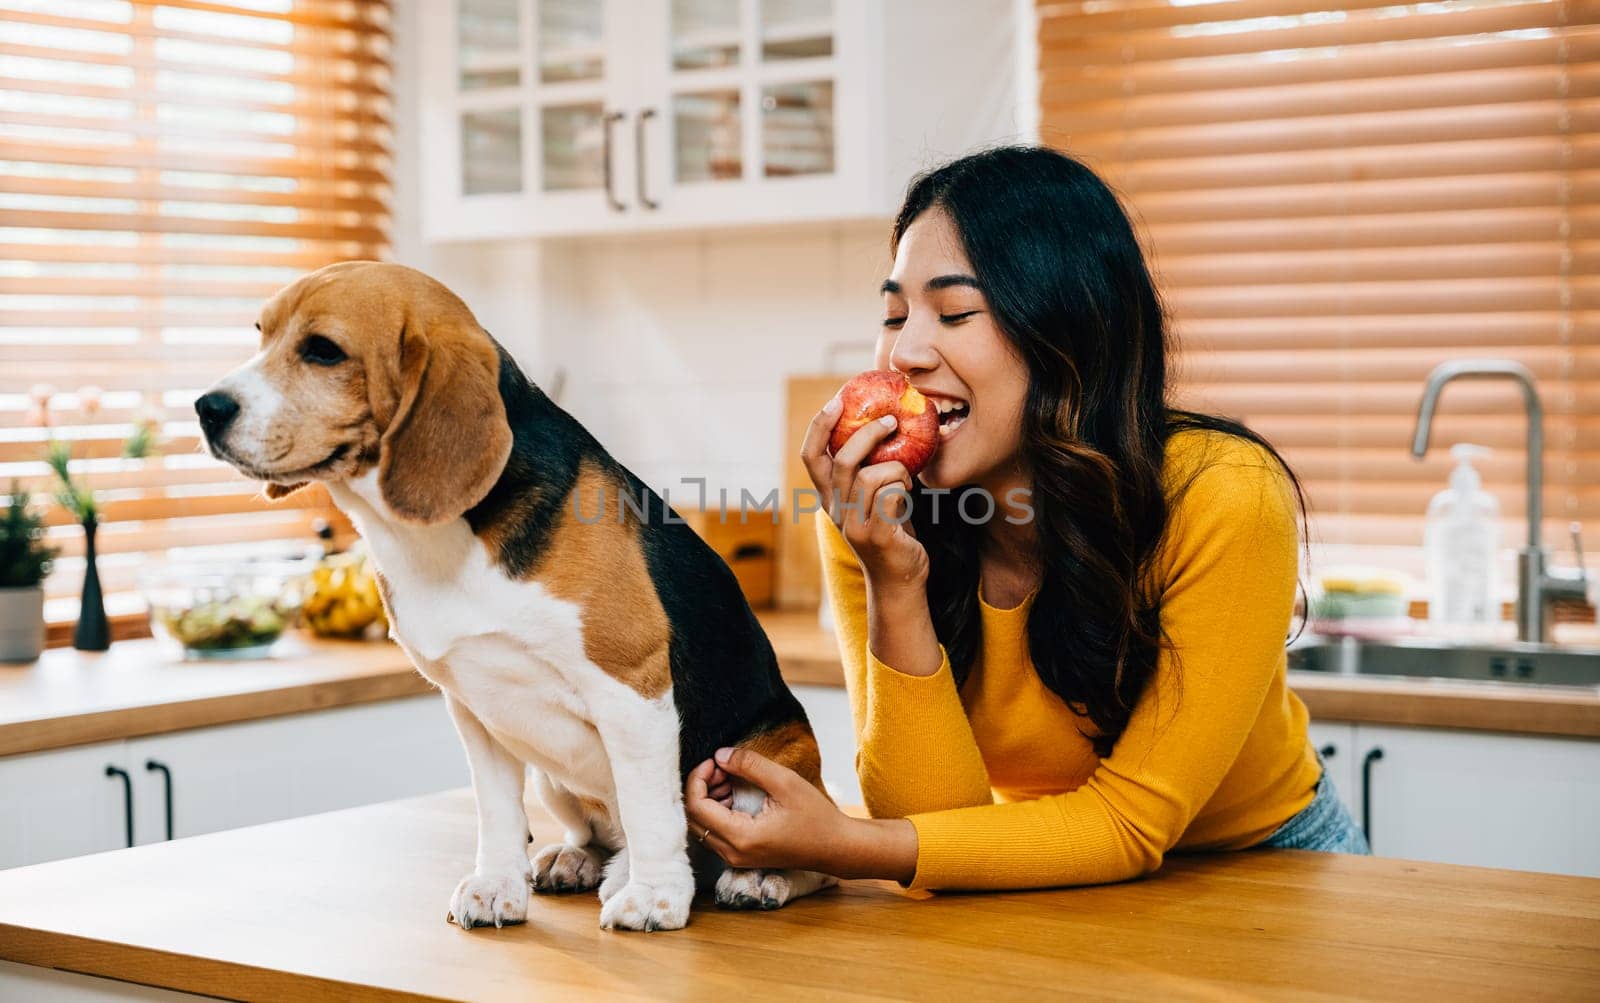 A red apple on the kitchen table becomes a symbol of togetherness as a woman and her retriever, her loyal companion, share it. Their joy and dedication as owner and pet shine. Pet love